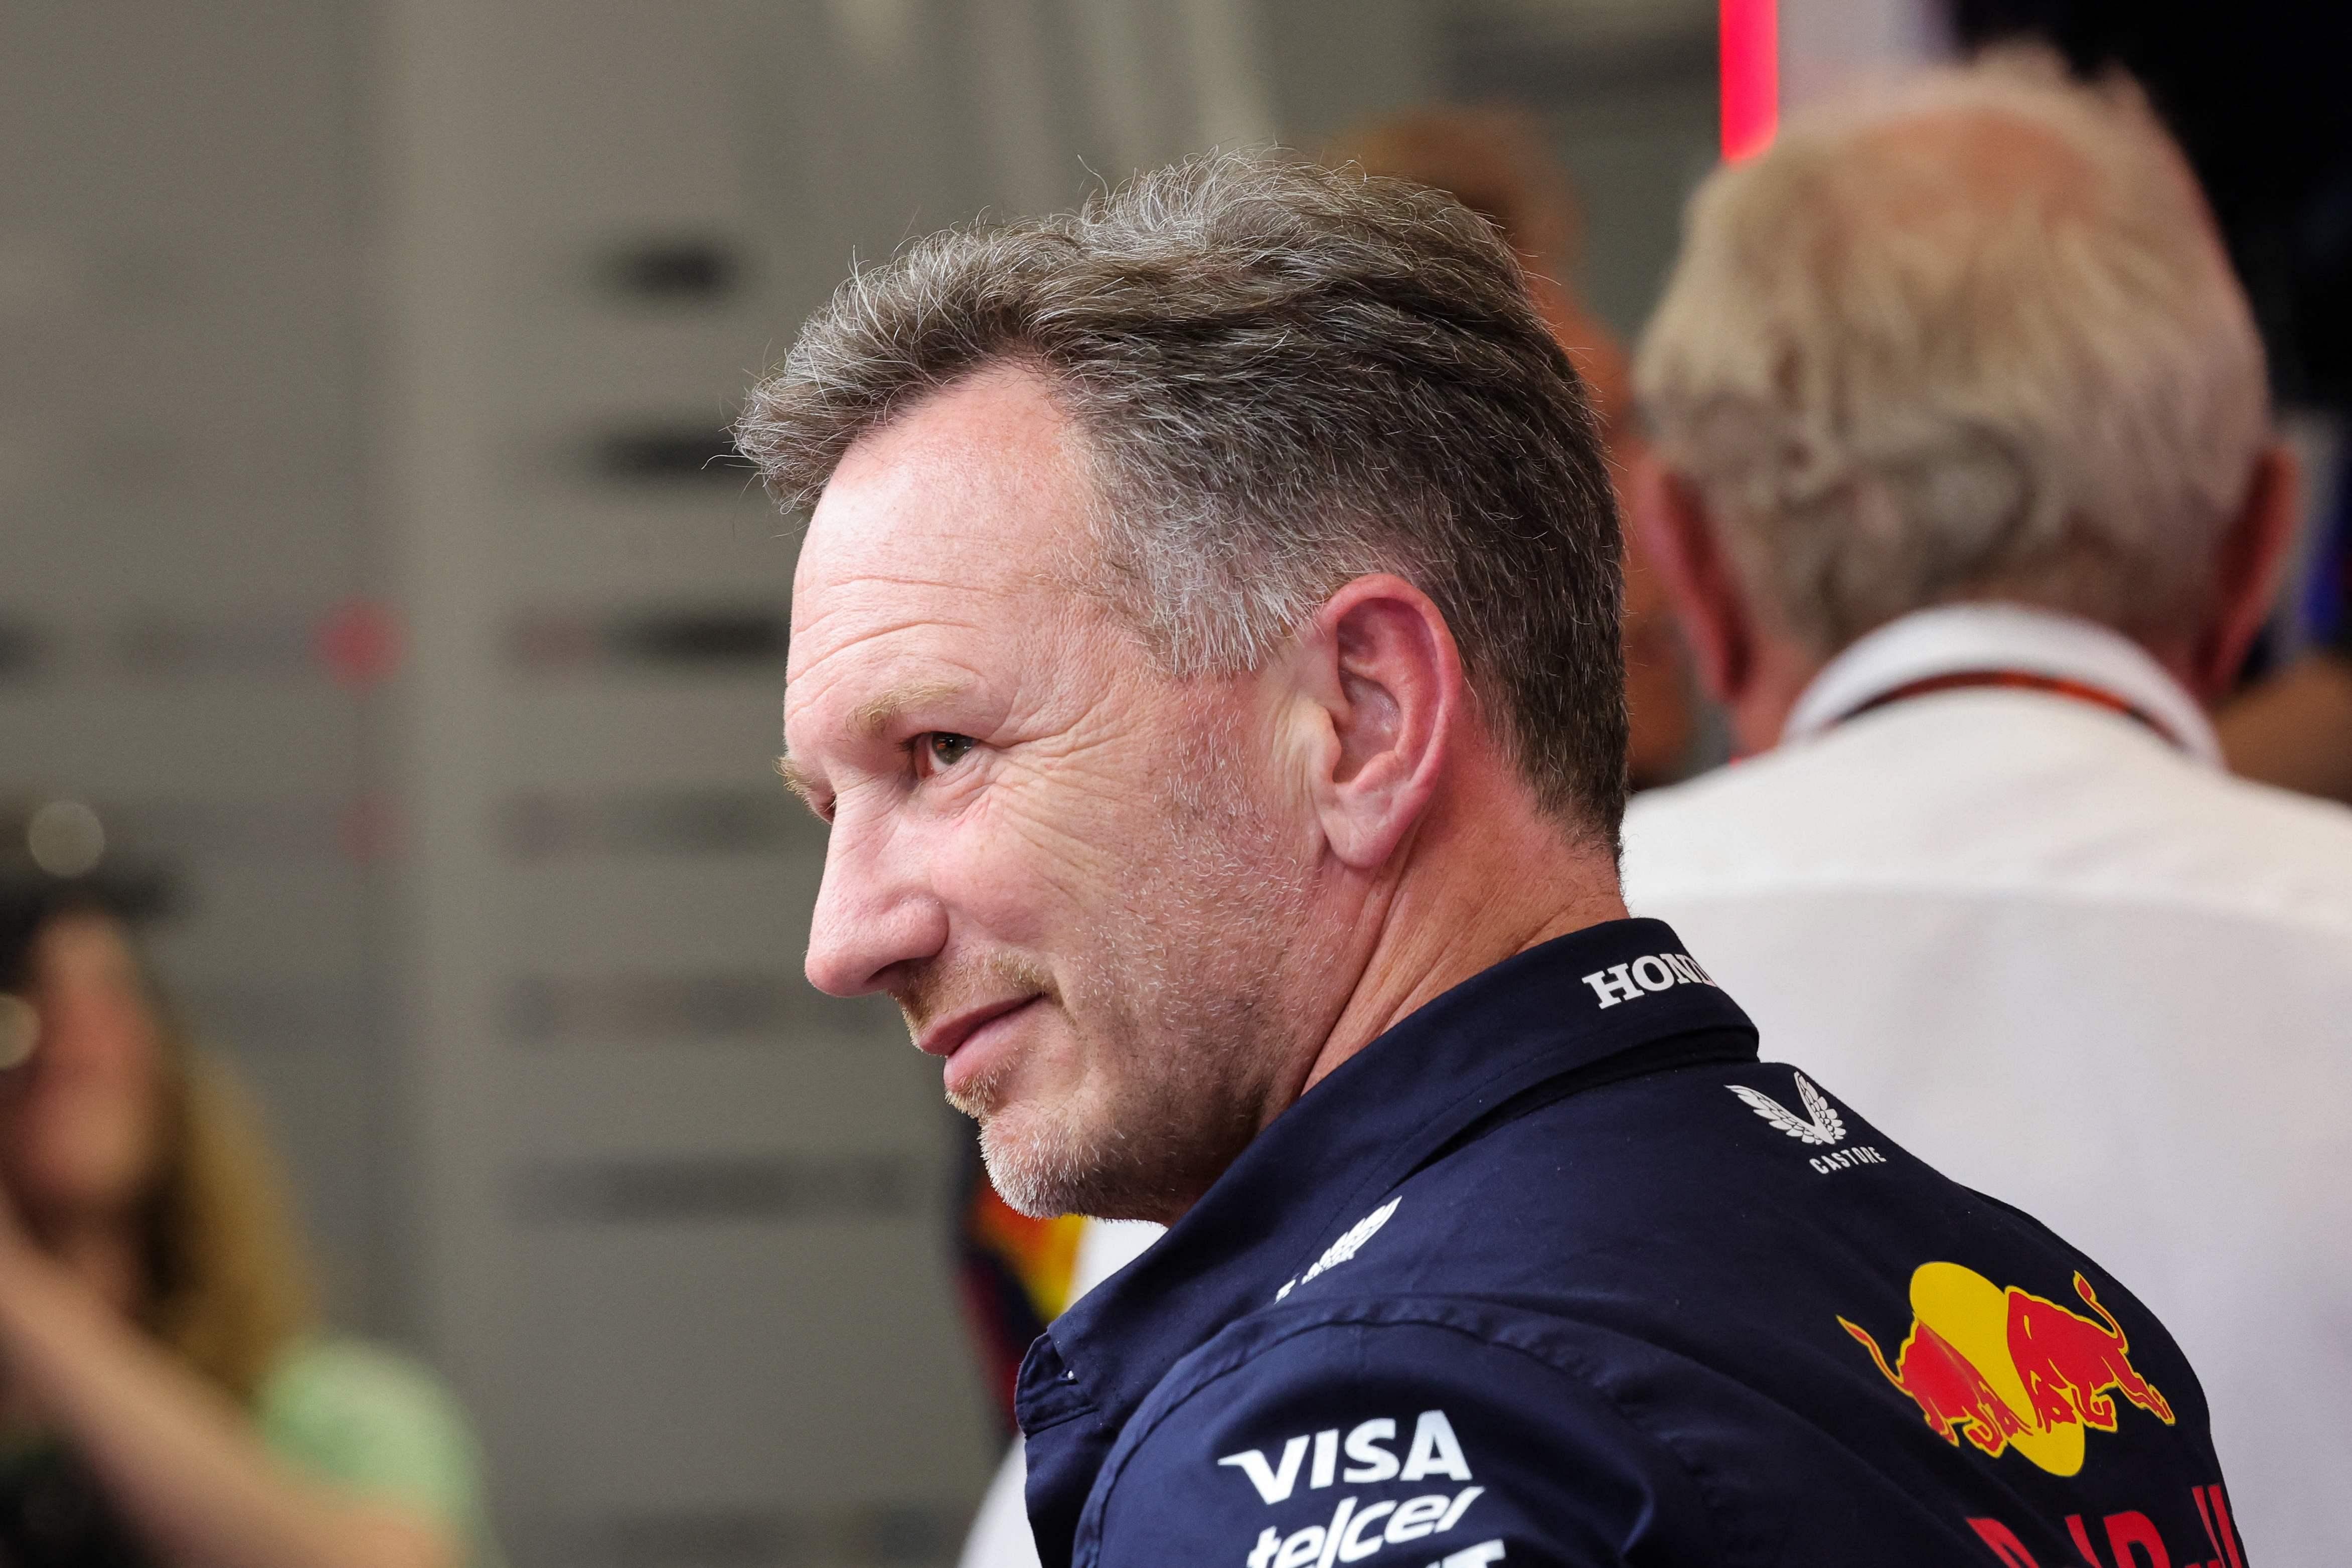 Red Bull’s Christian Horner seeks to turn focus to F1 after accuser is suspended